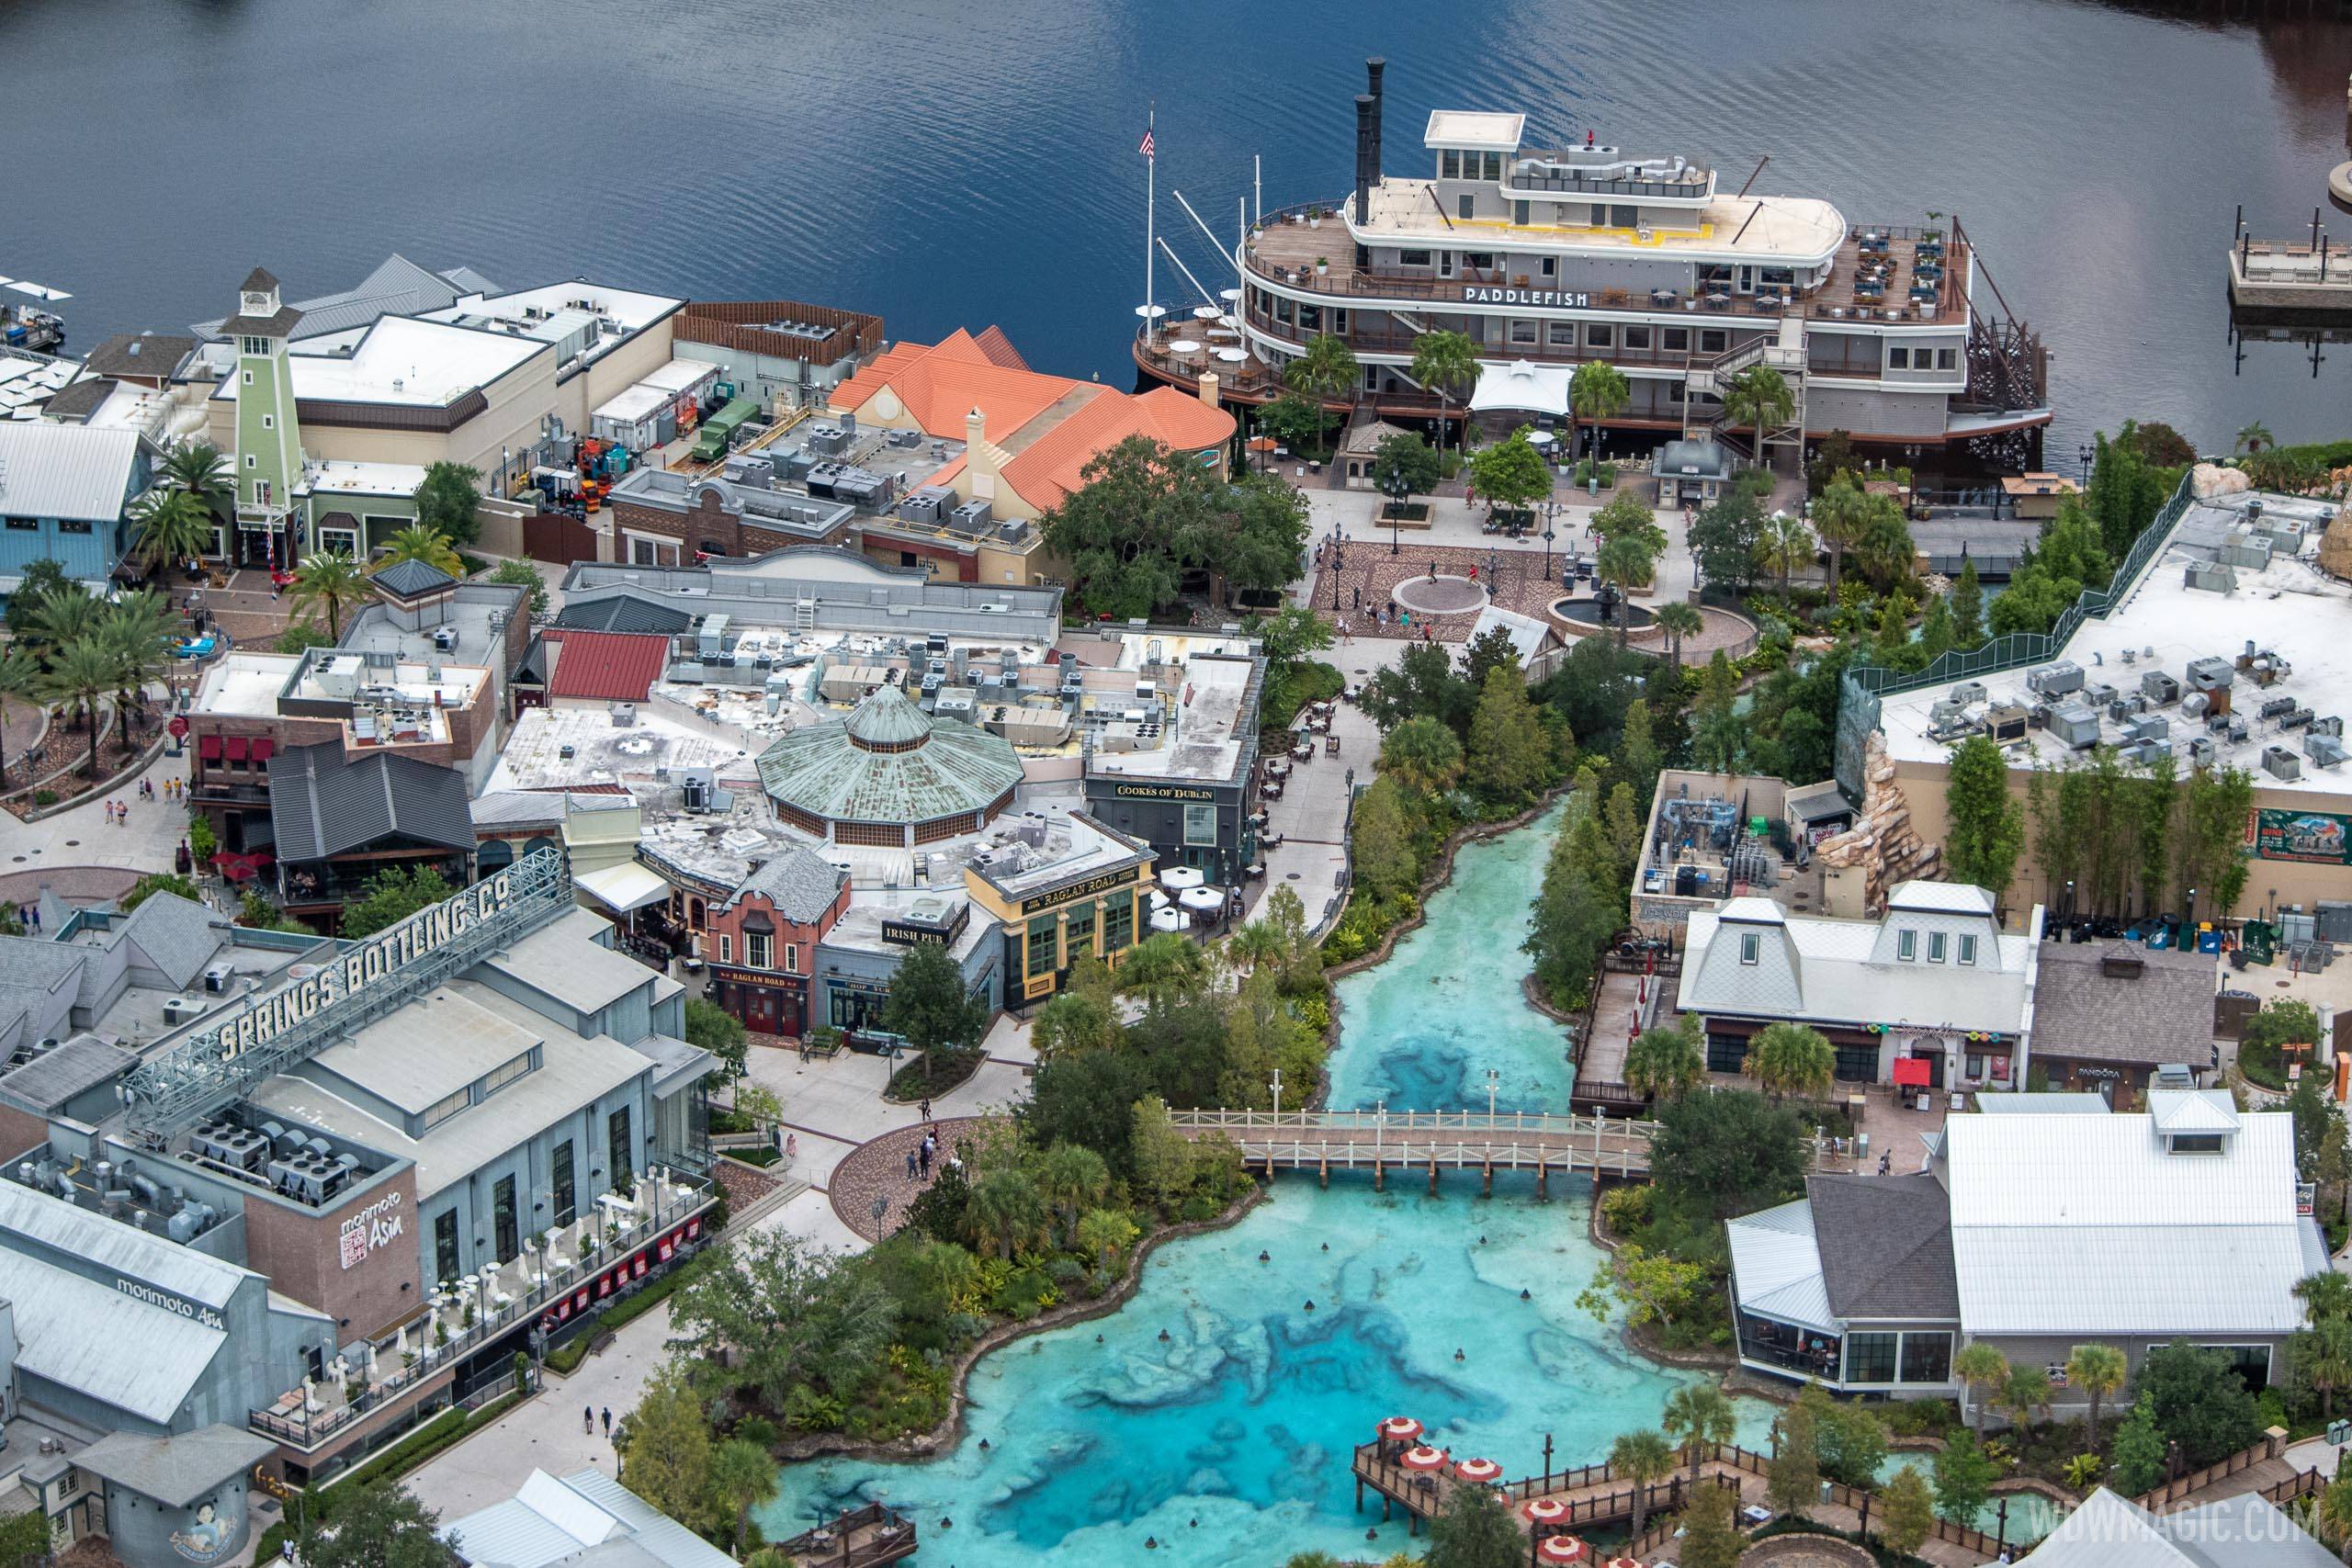 Latest on expected Disney Springs capacity closures during the holidays